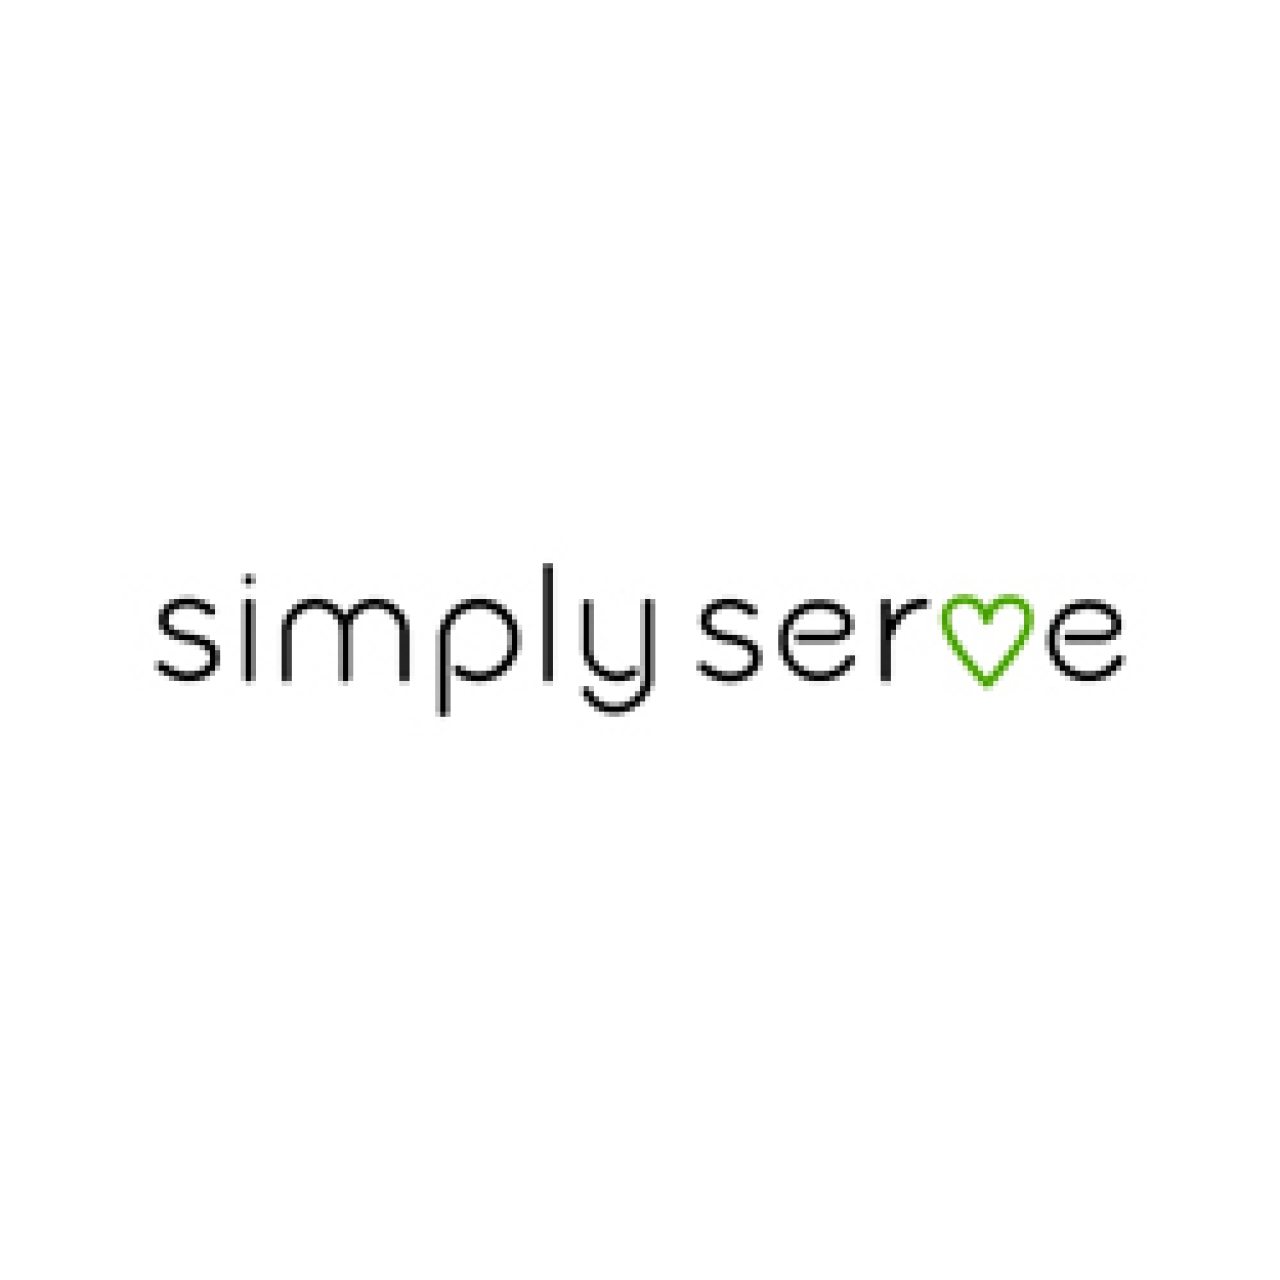 Simple Serve typographic logo design for Carlos O&#039;Kelly&#039;s